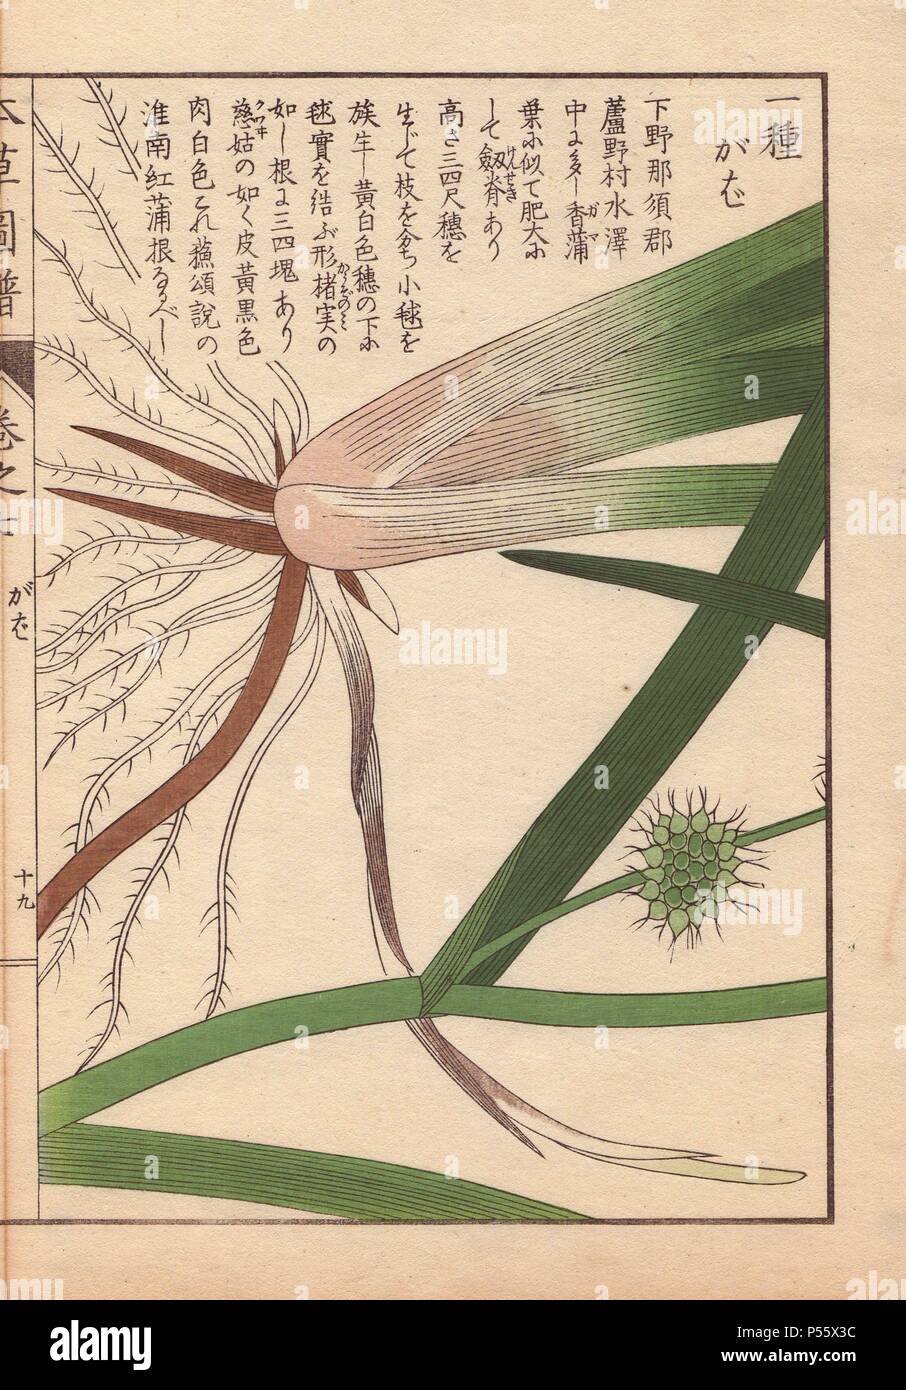 Leaves, roots and seeds of bur-reed, Sparganium racemosum Huds.. Colour-printed woodblock engraving by Kan'en Iwasaki from 'Honzo Zufu,' an Illustrated Guide to Medicinal Plants, 1884. Iwasaki (1786-1842) was a Japanese botanist, entomologist and zoologist. He was one of the first Japanese botanists to incorporate western knowledge into his studies. Stock Photo